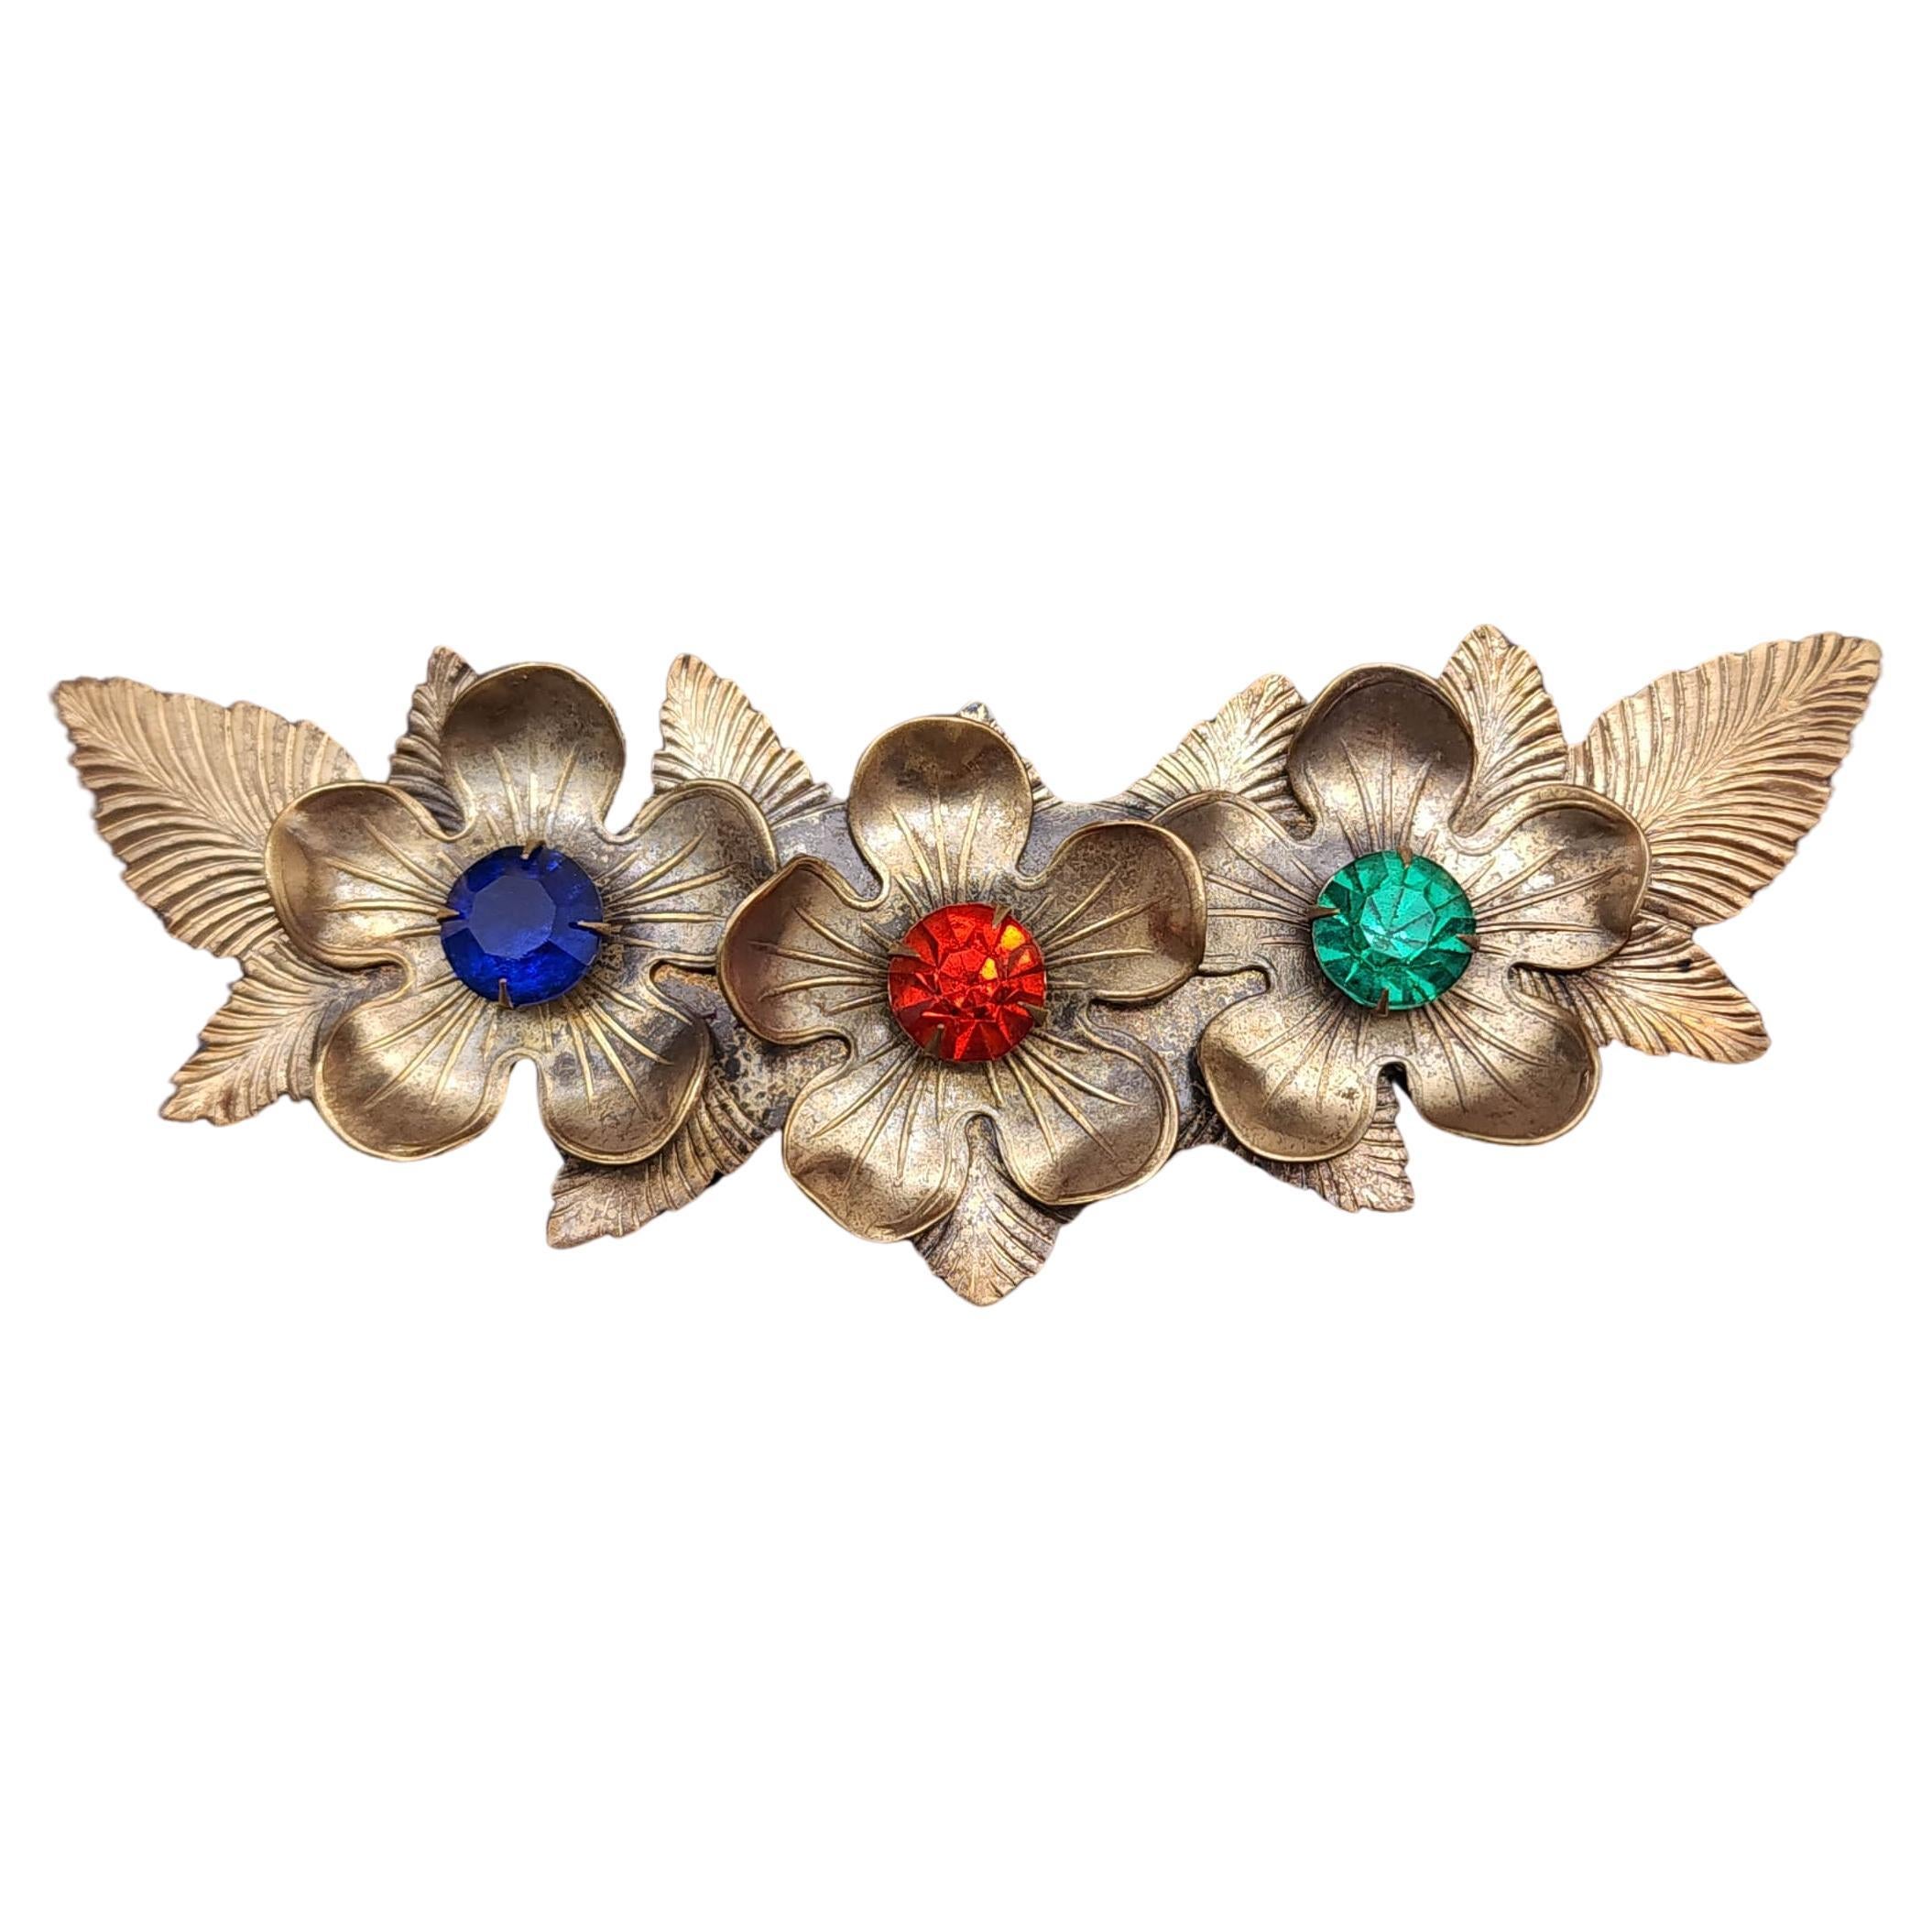 Antique Floral Pin with Multi-Colored Crystals, Early 1900s, Gold Plated